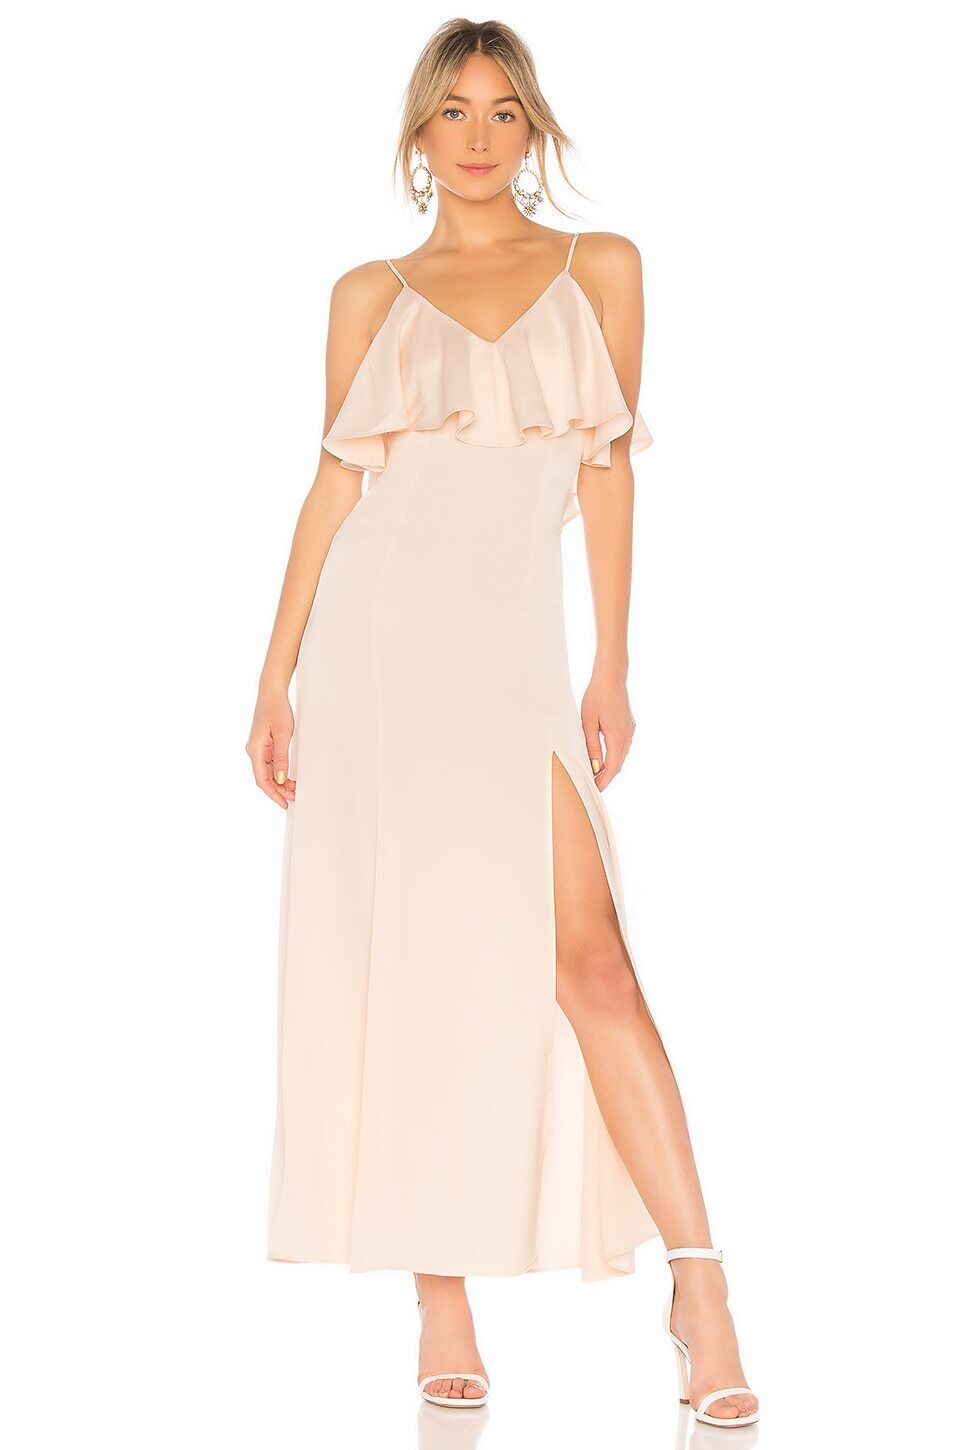 LPA V Neck Ruffle Gown in Champagne Flounce Overlay Design